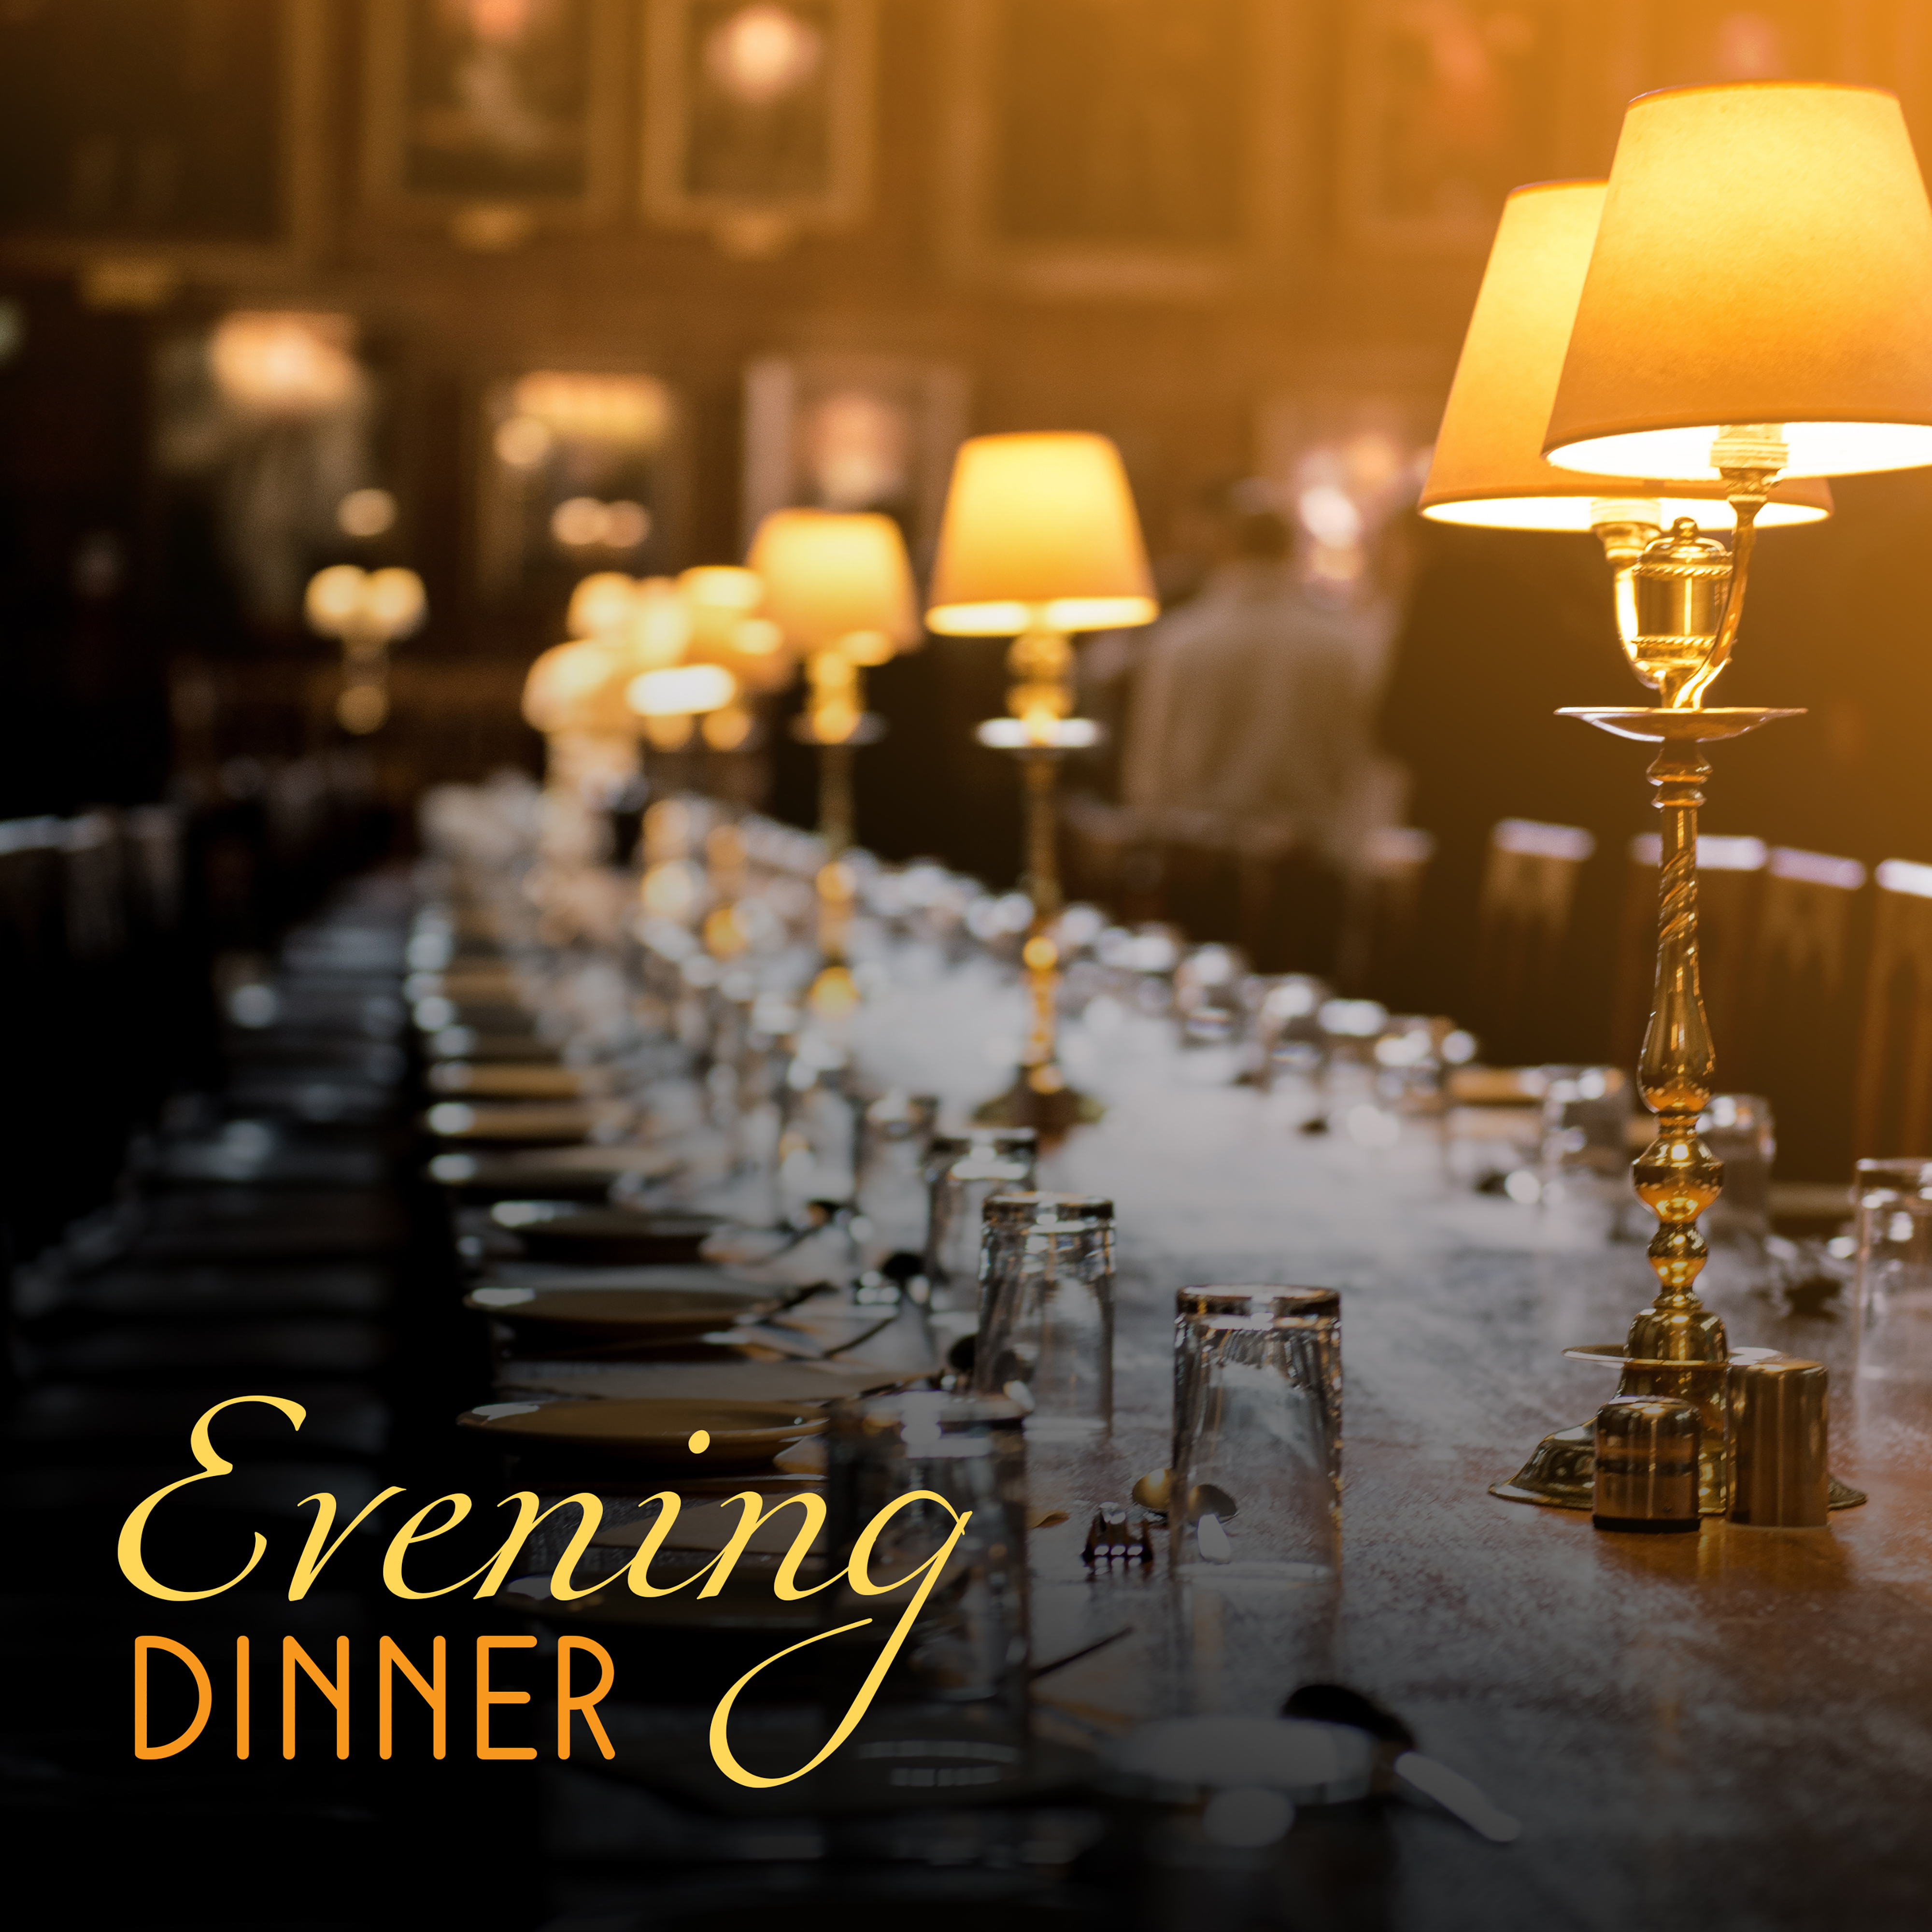 Evening Dinner – Soft Piano Bar, Jazz for Restaurant, Smooth Jazz, Piano Cafe, Rest with Jazz